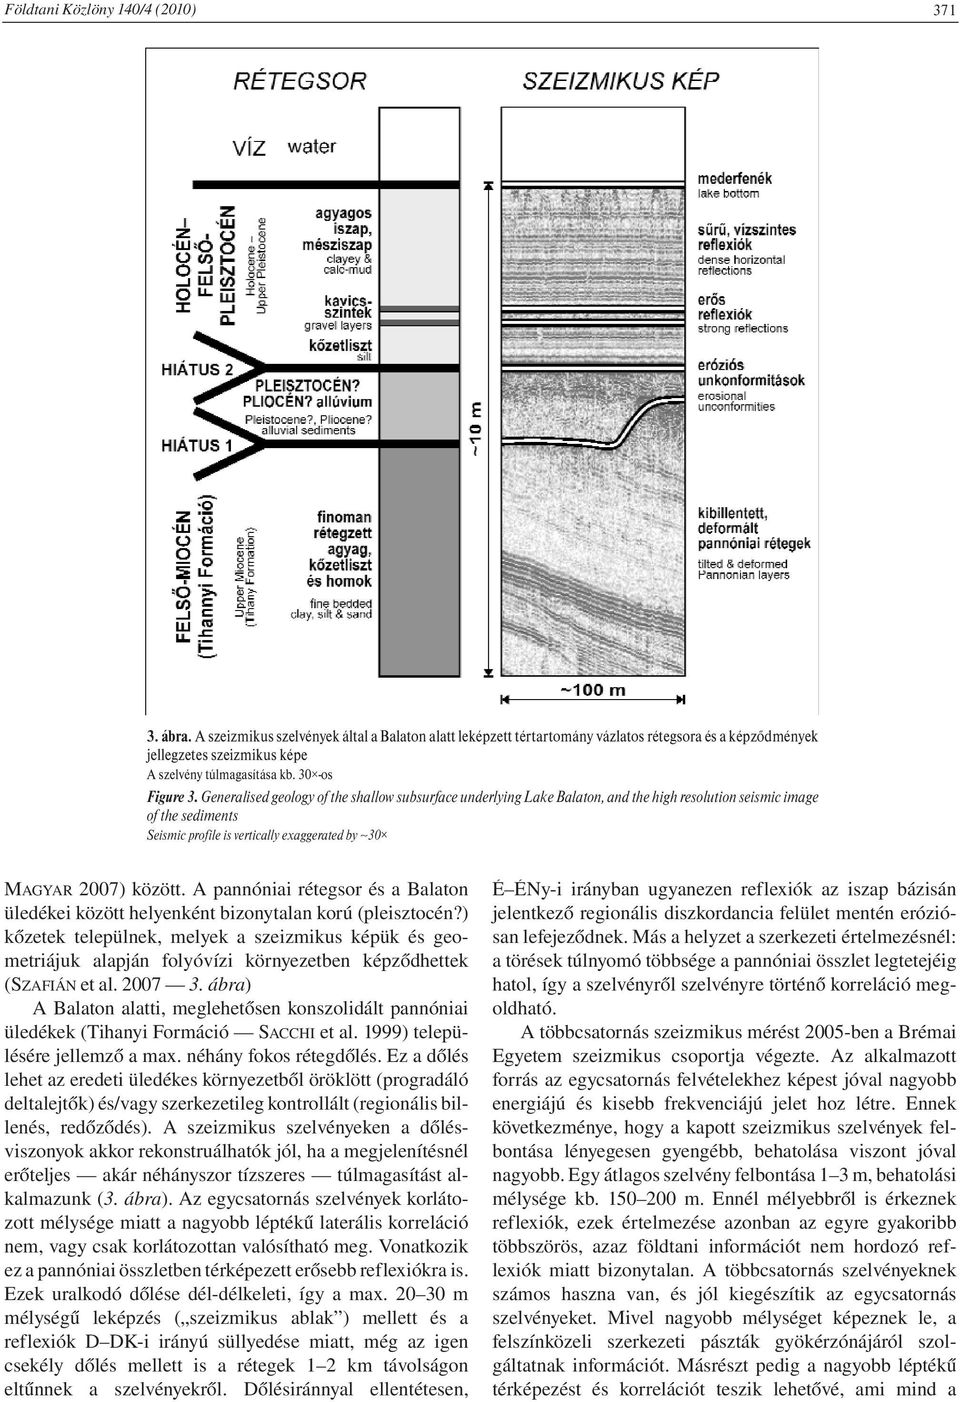 Generalised geology of the shallow subsurface underlying Lake Balaton, and the high resolution seismic image of the sediments Seismic profile is vertically exaggerated by 30 MAGYAR 2007) között.